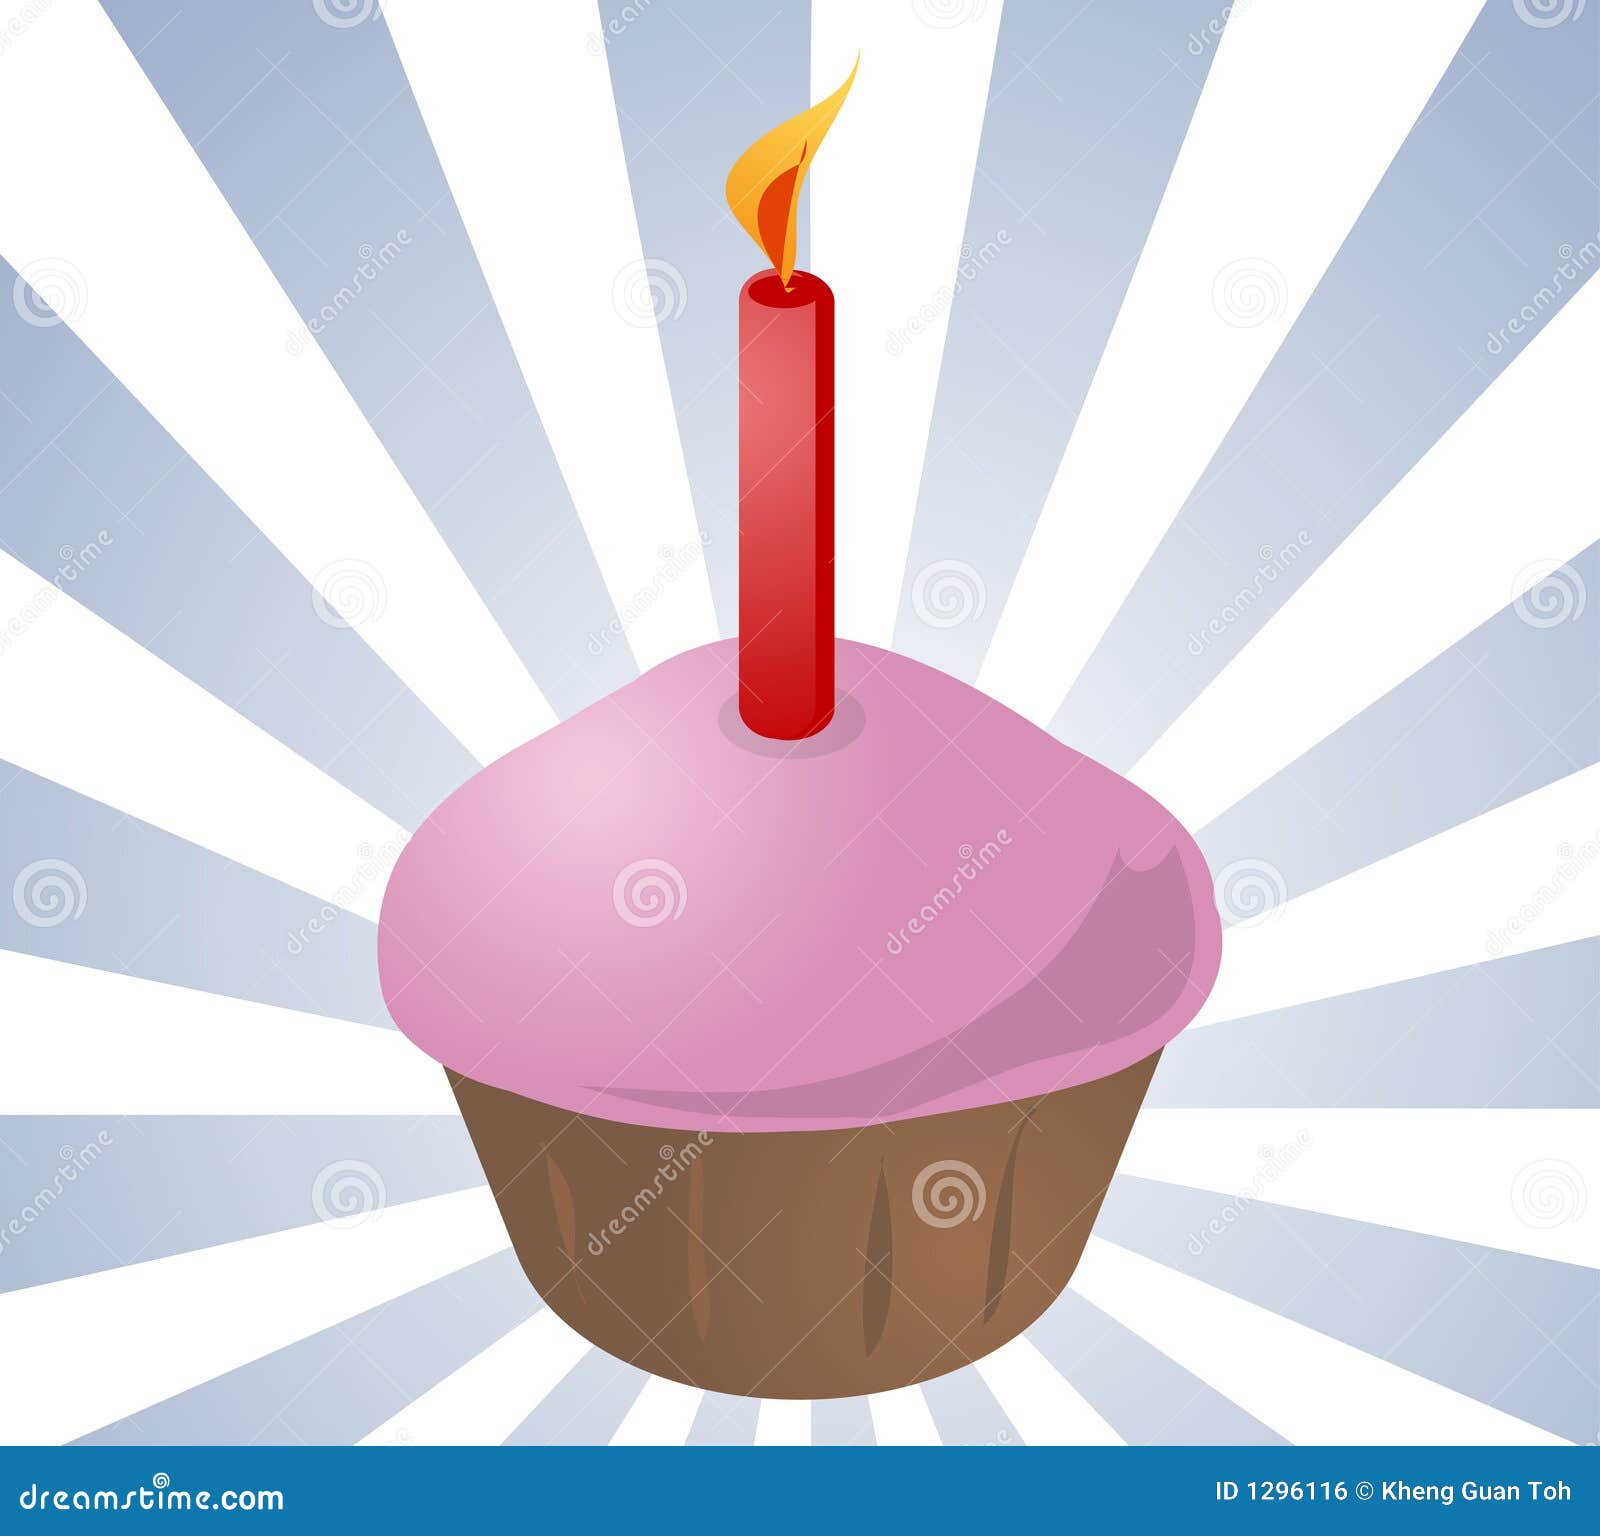 Cupcake Birthday Clipart Stock Illustrations – 4,381 Cupcake Birthday Clipart Stock Illustrations, Vectors & Clipart - Dreamstime